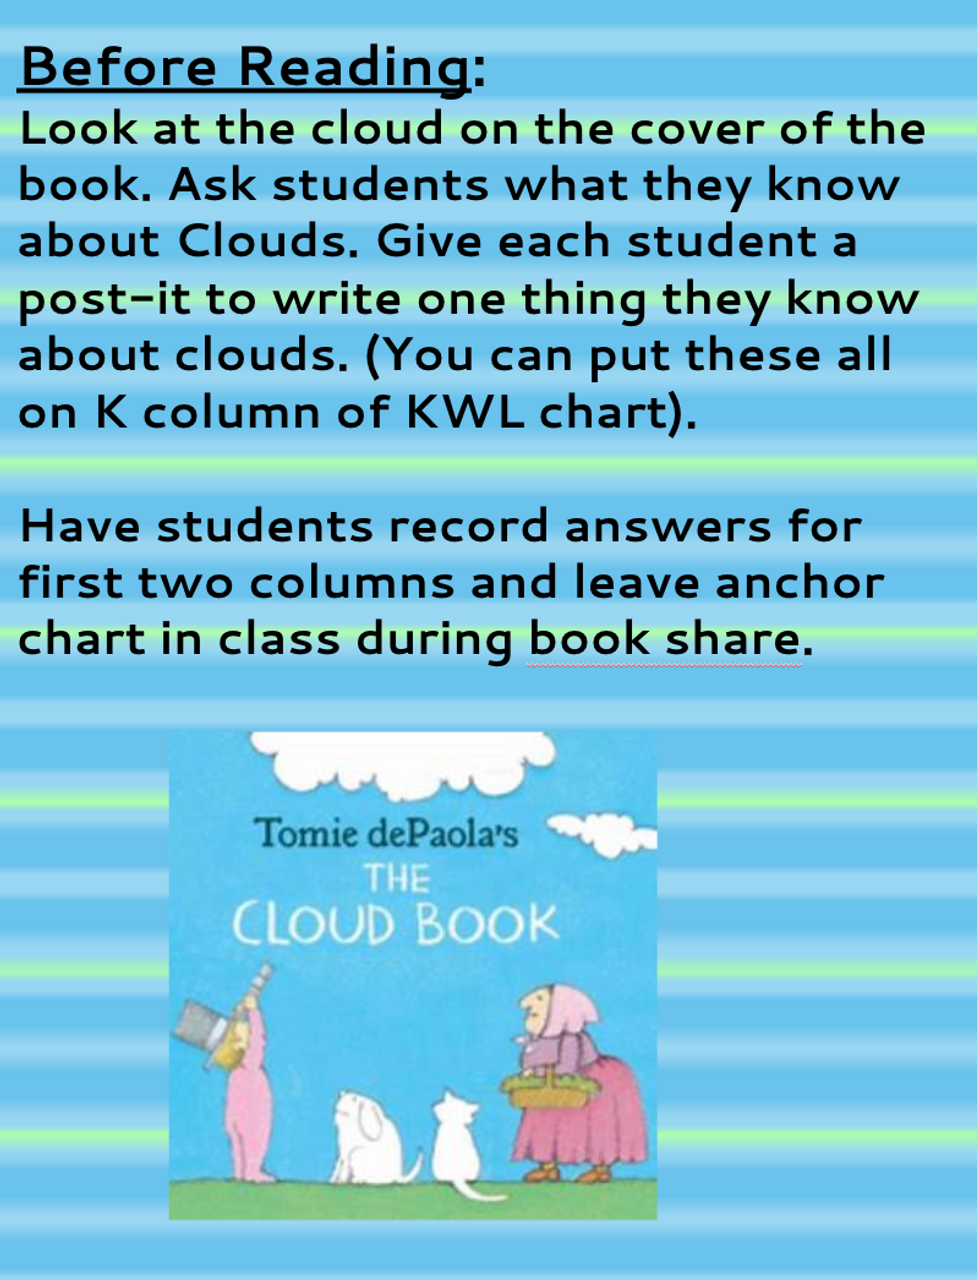 THE CLOUD BOOK BY TOMIE dePAOLA READING & ACTIVITY PACK